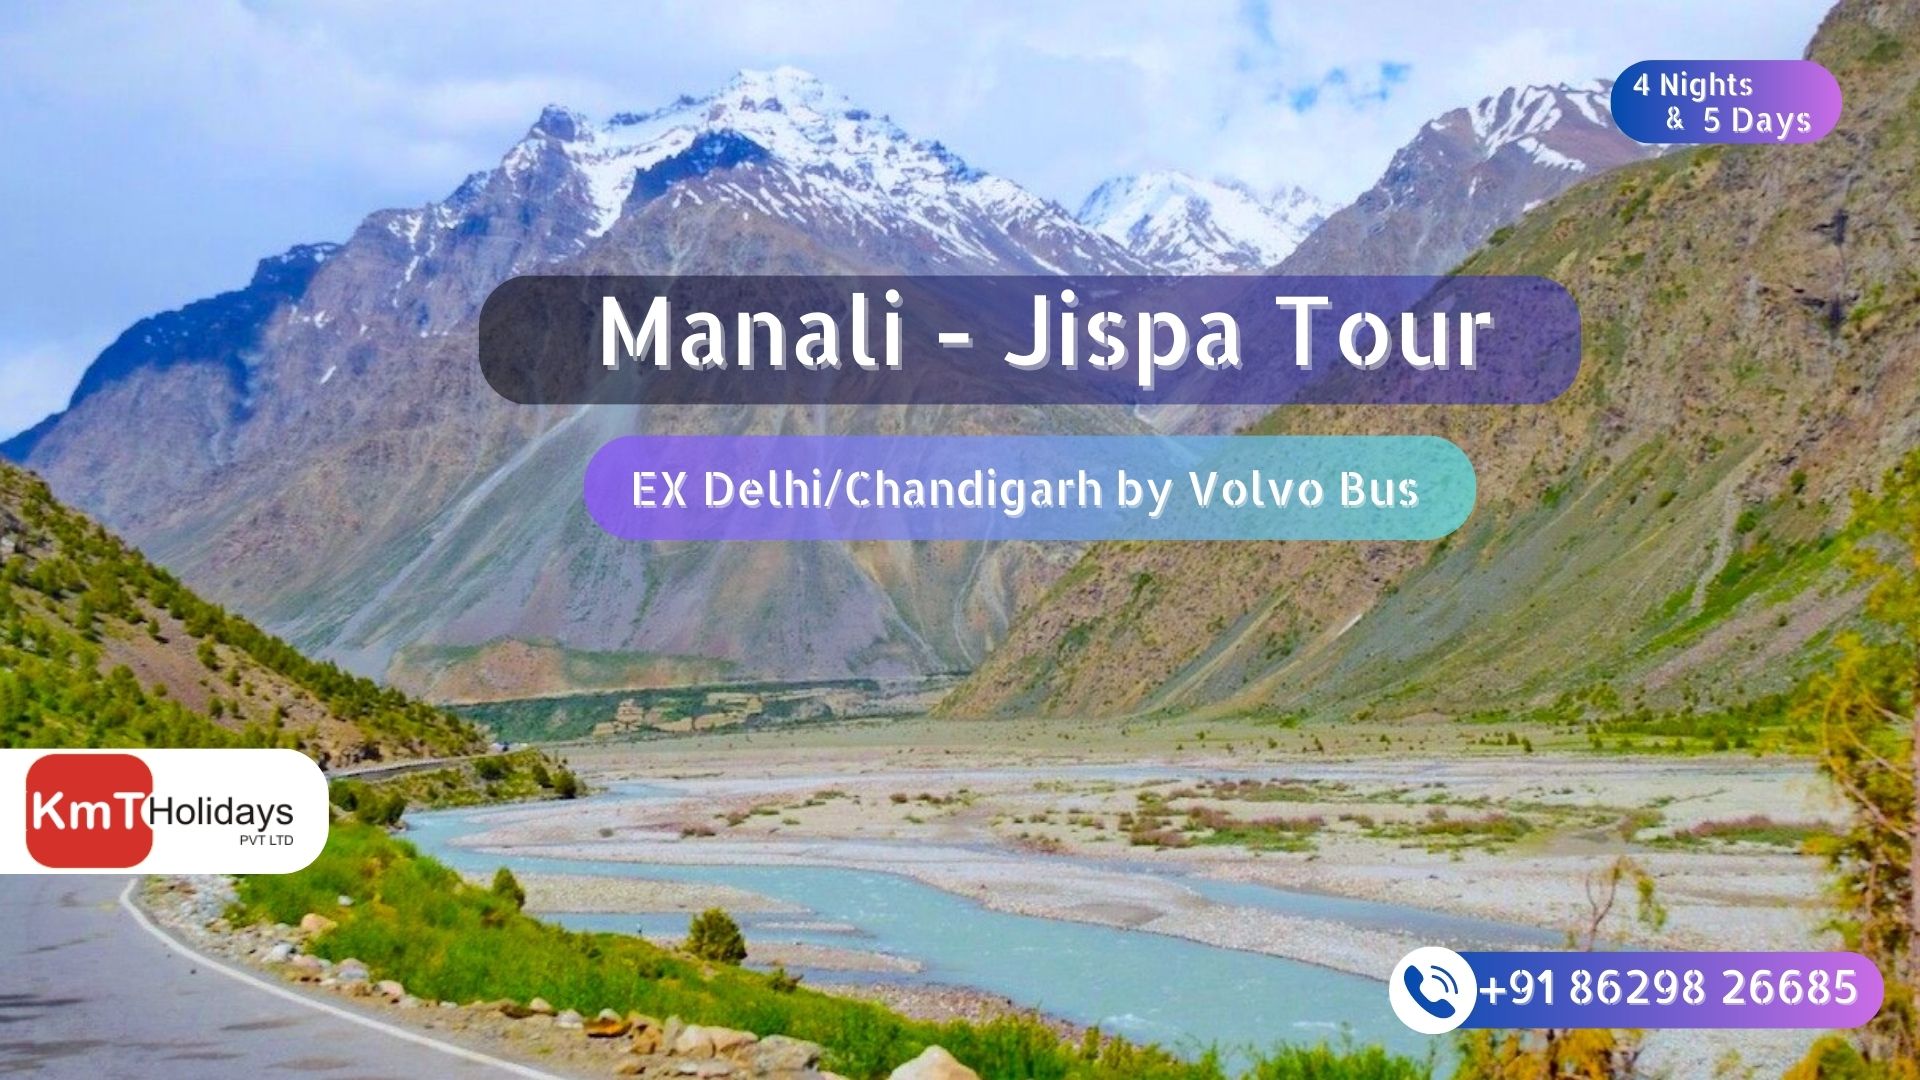 manali tour package with atal tunnel, sissu valley and jispa valley